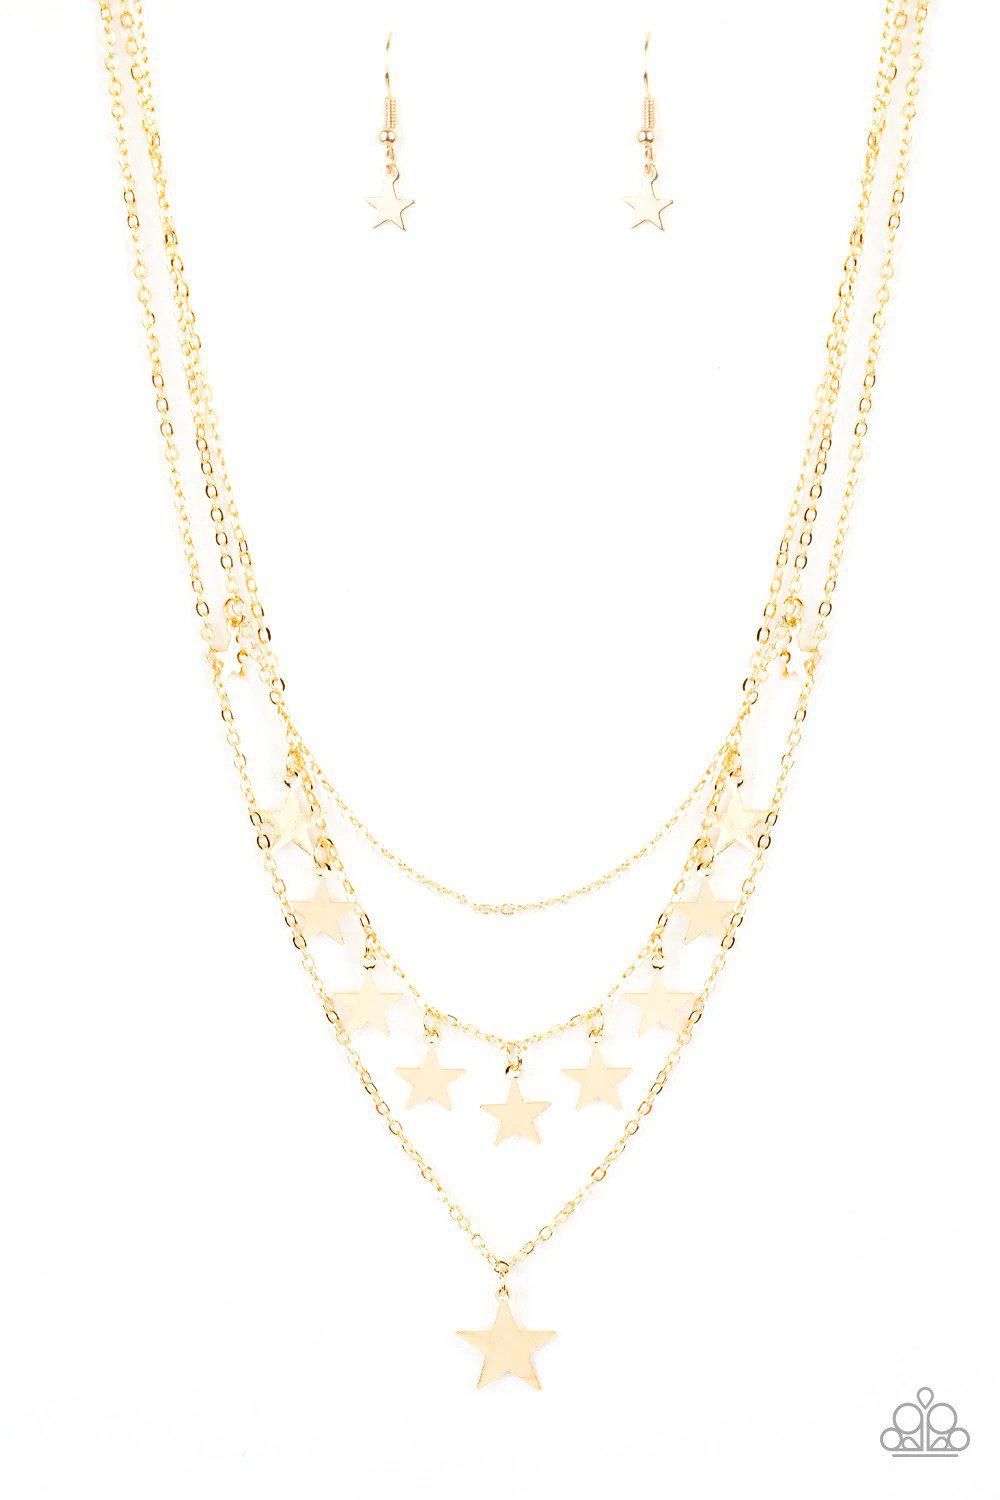 Americana Girl Gold Necklace - Paparazzi Accessories- on model - CarasShop.com - $5 Jewelry by Cara Jewels